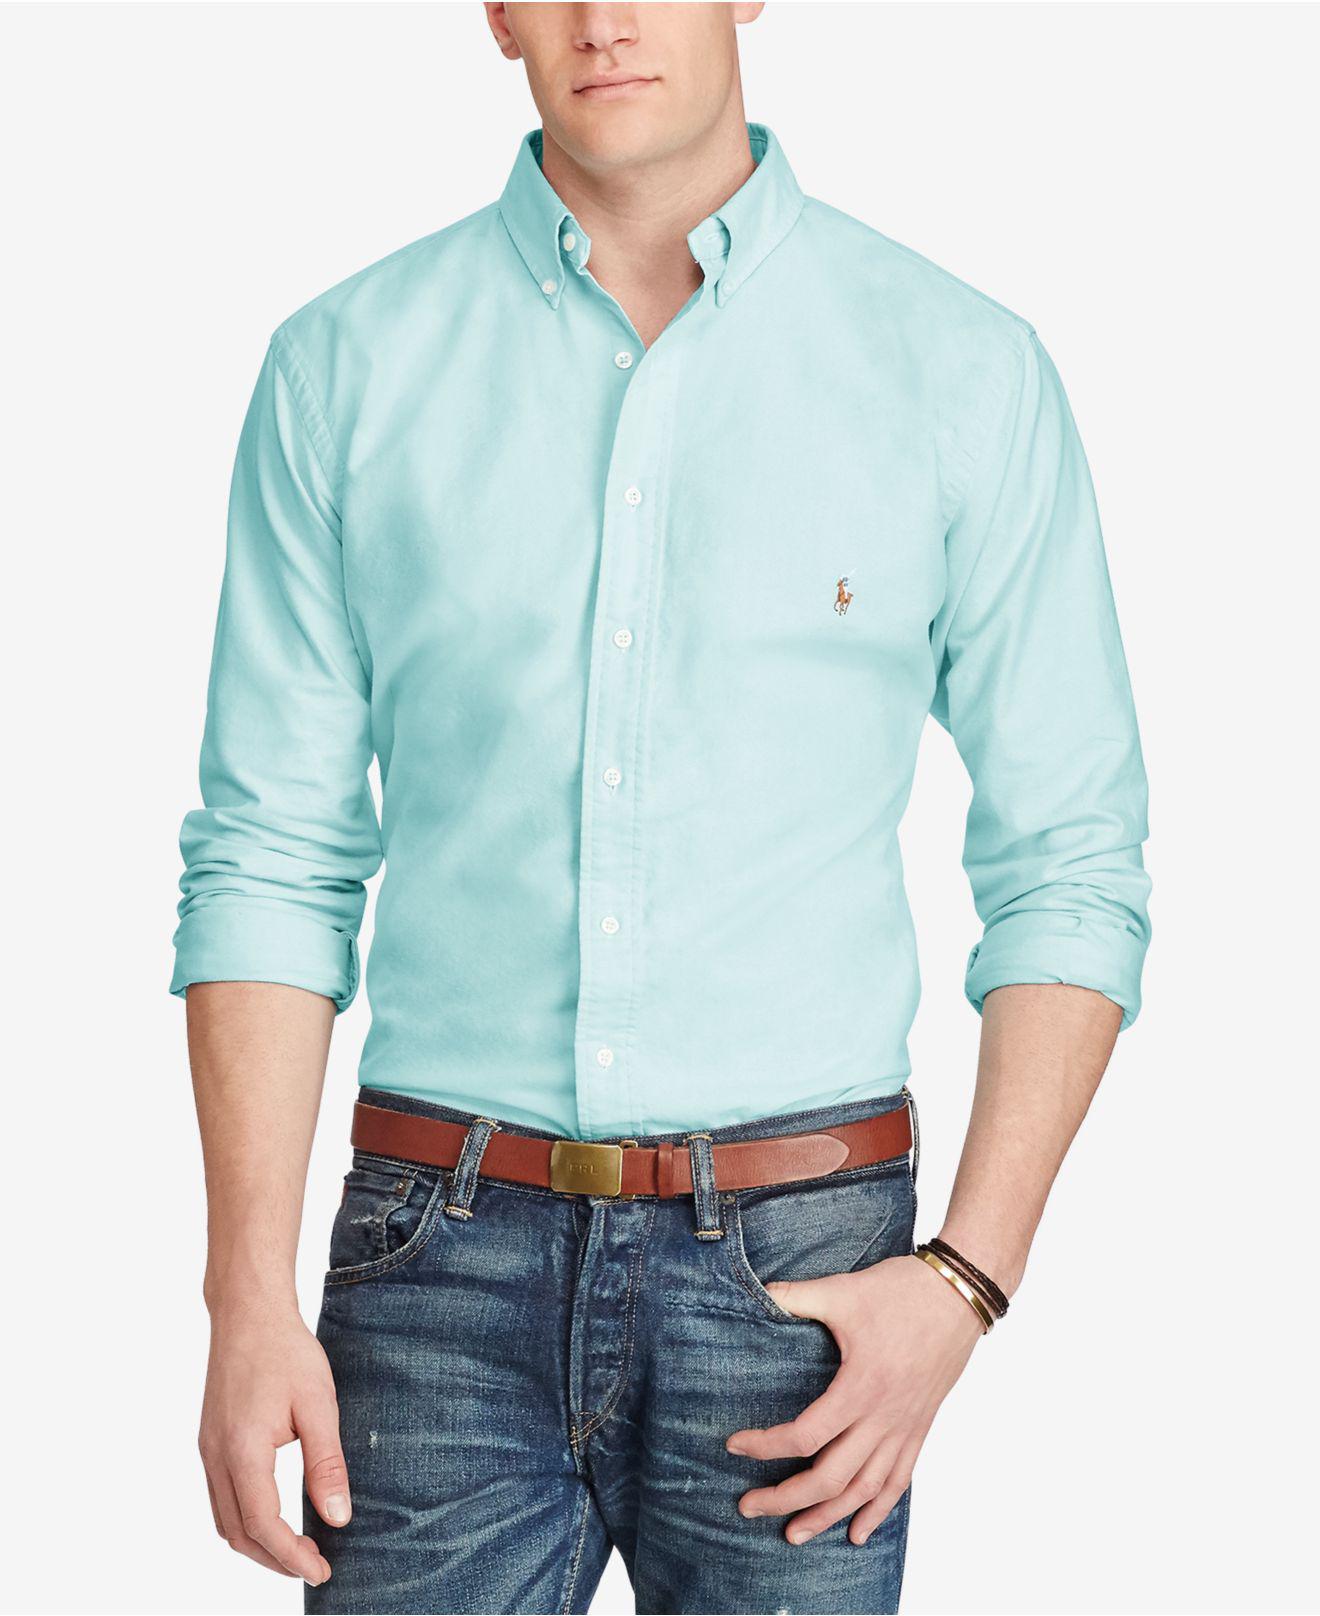 Ralph Lauren Cotton The Iconic Oxford Shirt in Blue for Men - Save 25% ...